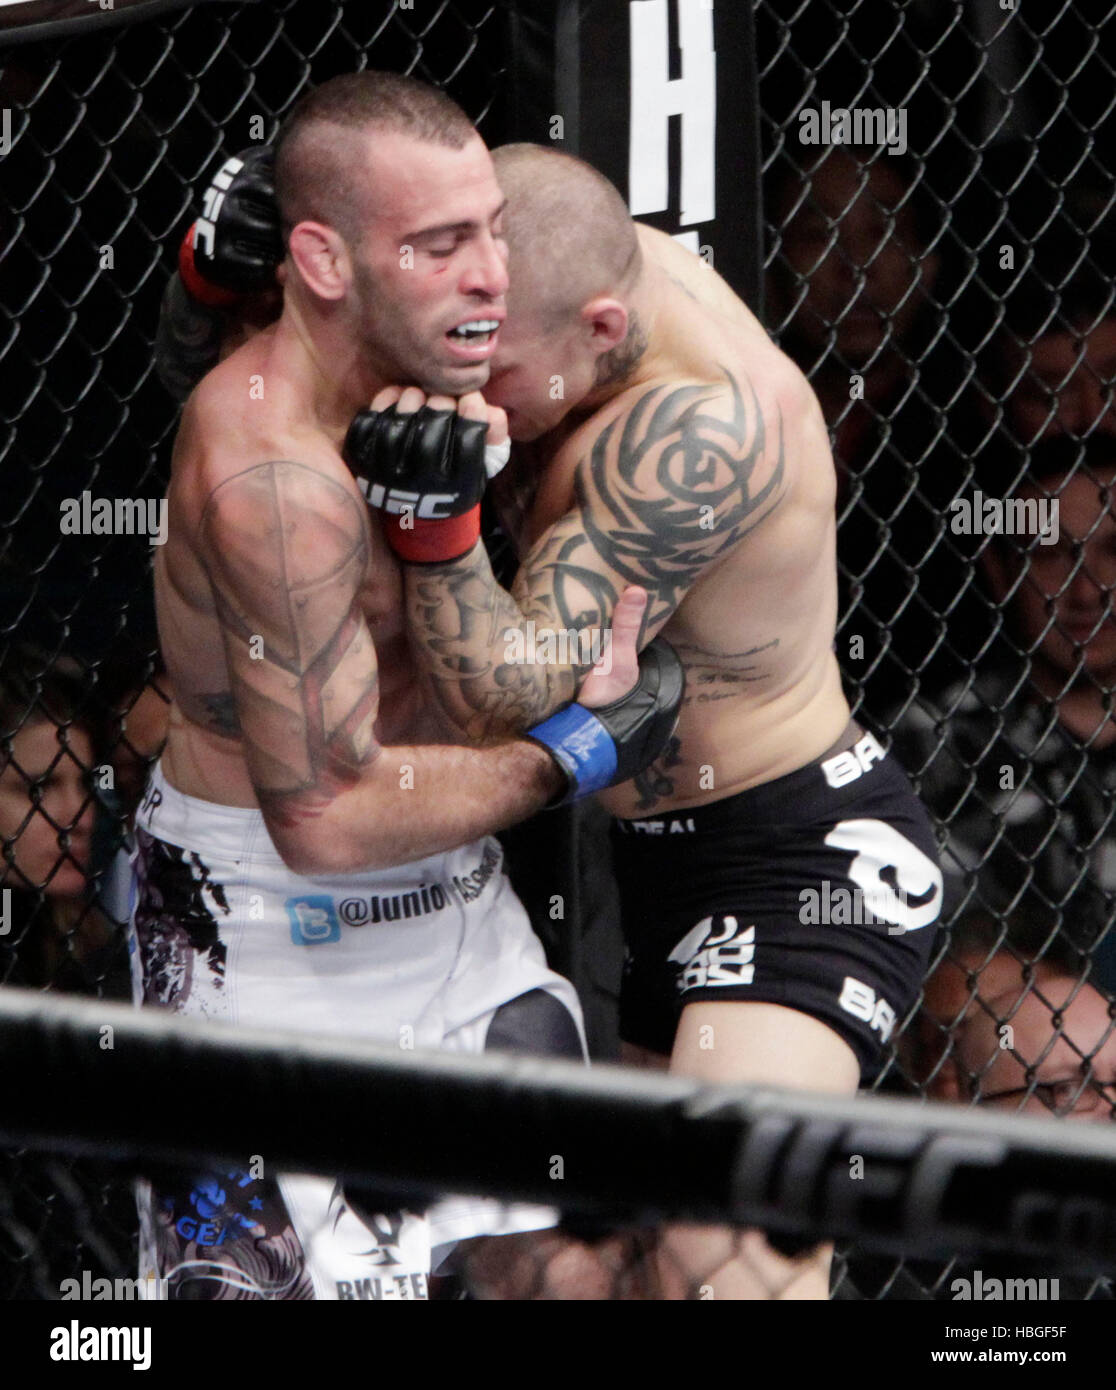 UFC fighter Ross Pearson, right, fights Junior Assuncao at UFC 141 at the MGM Grand Garden Arena in Las Vegas, Nevada on Friday, December 30, 2011. Photo by Francis Specker Stock Photo